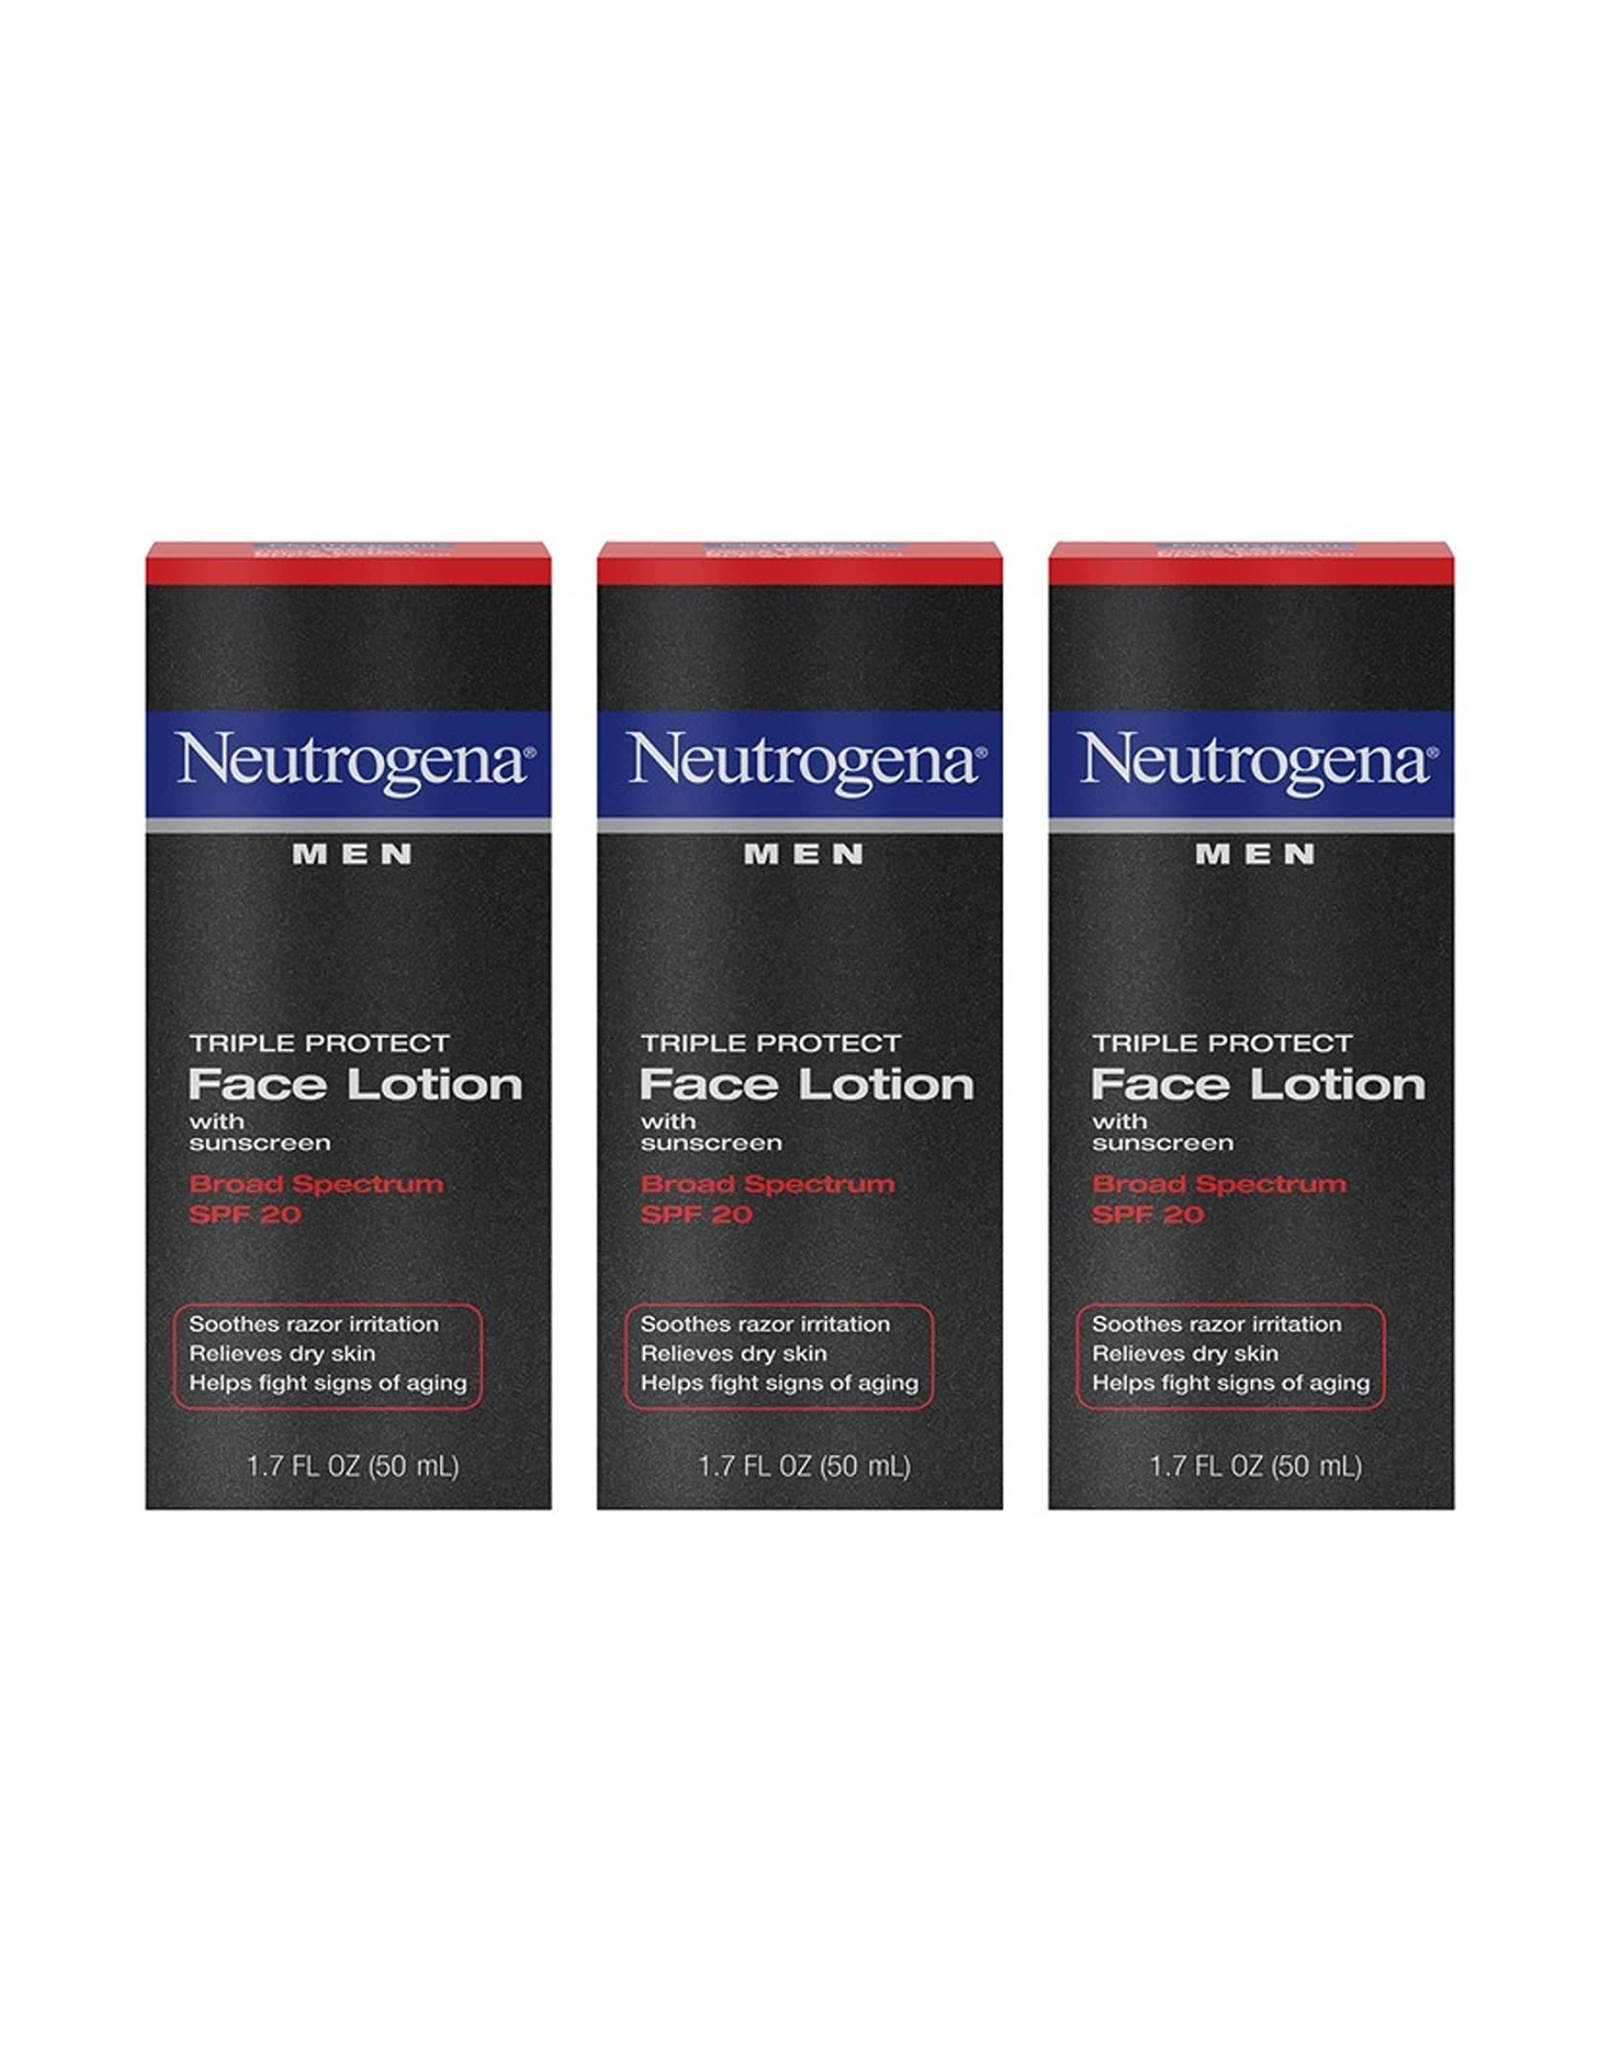 Neutrogena Triple Protect Face Lotion for Men, SPF 20, 1.7 Ounce Pack of 3